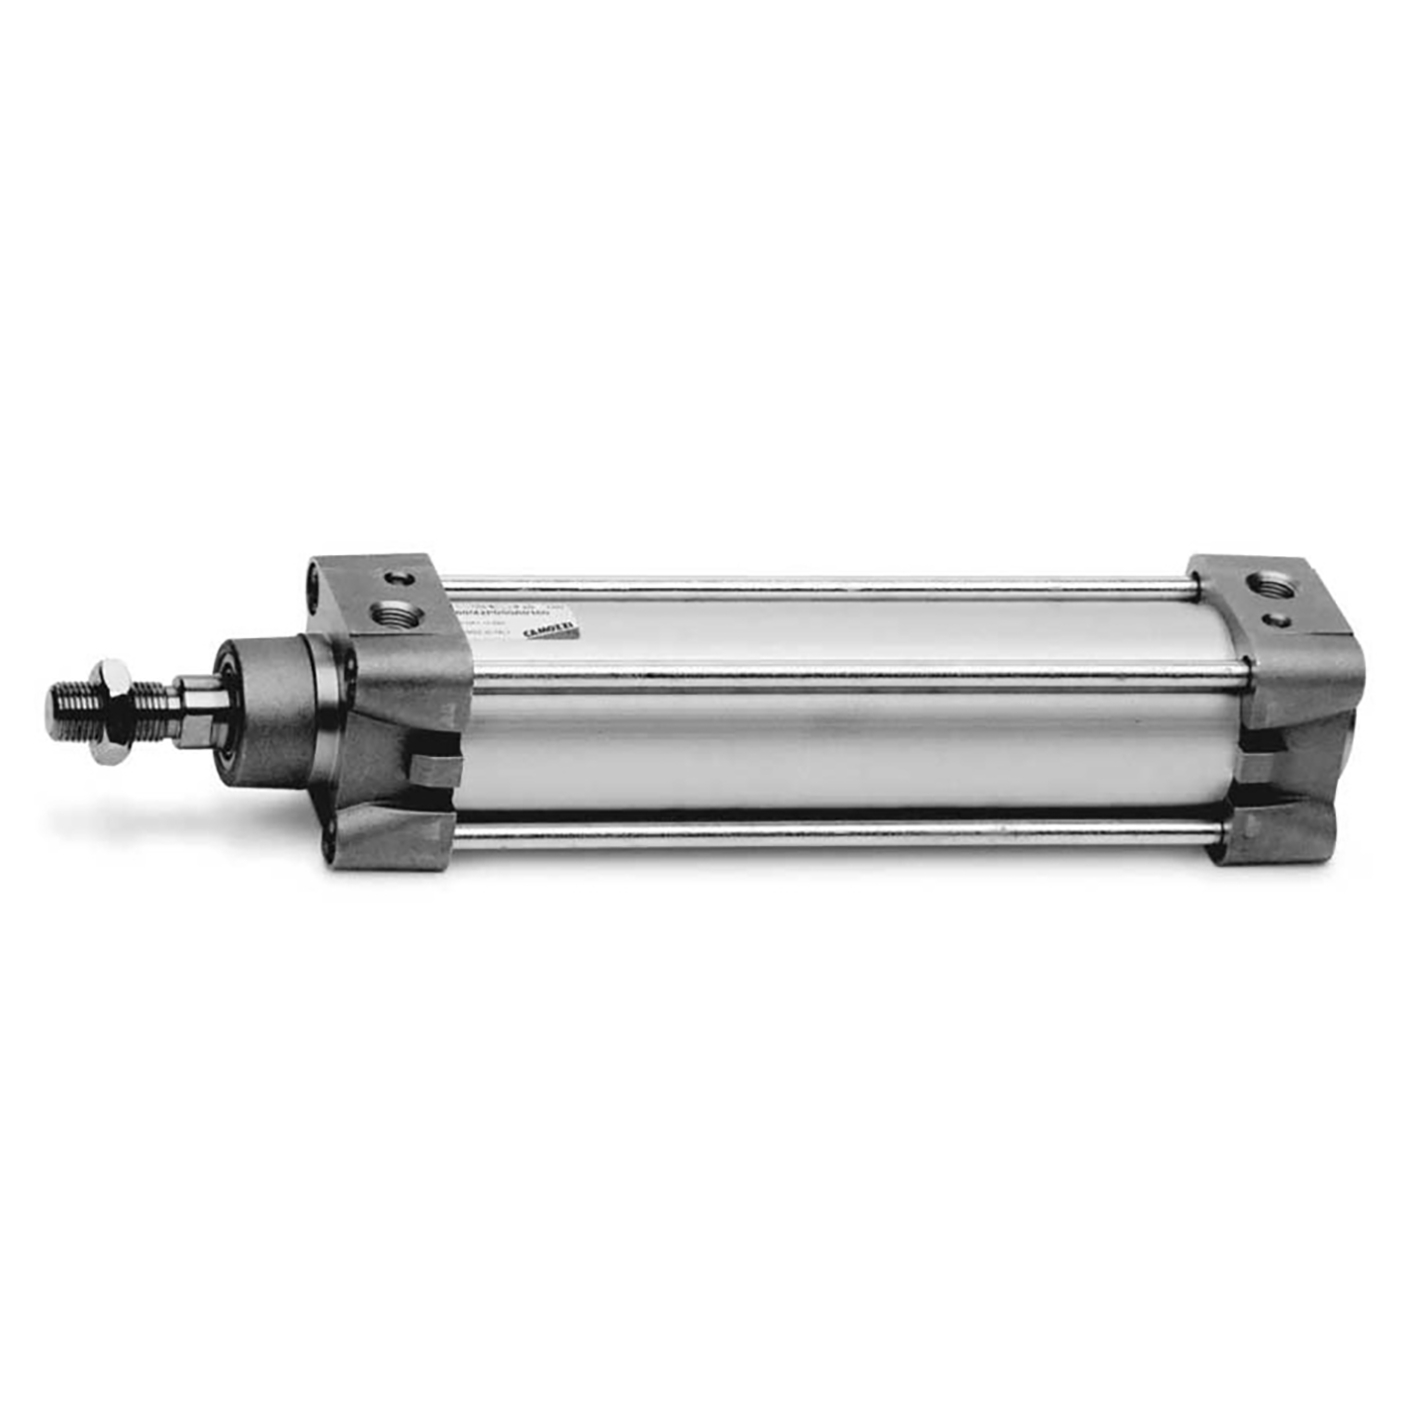 40X200 1/4" BSP DBLE ACTING CYLINDER